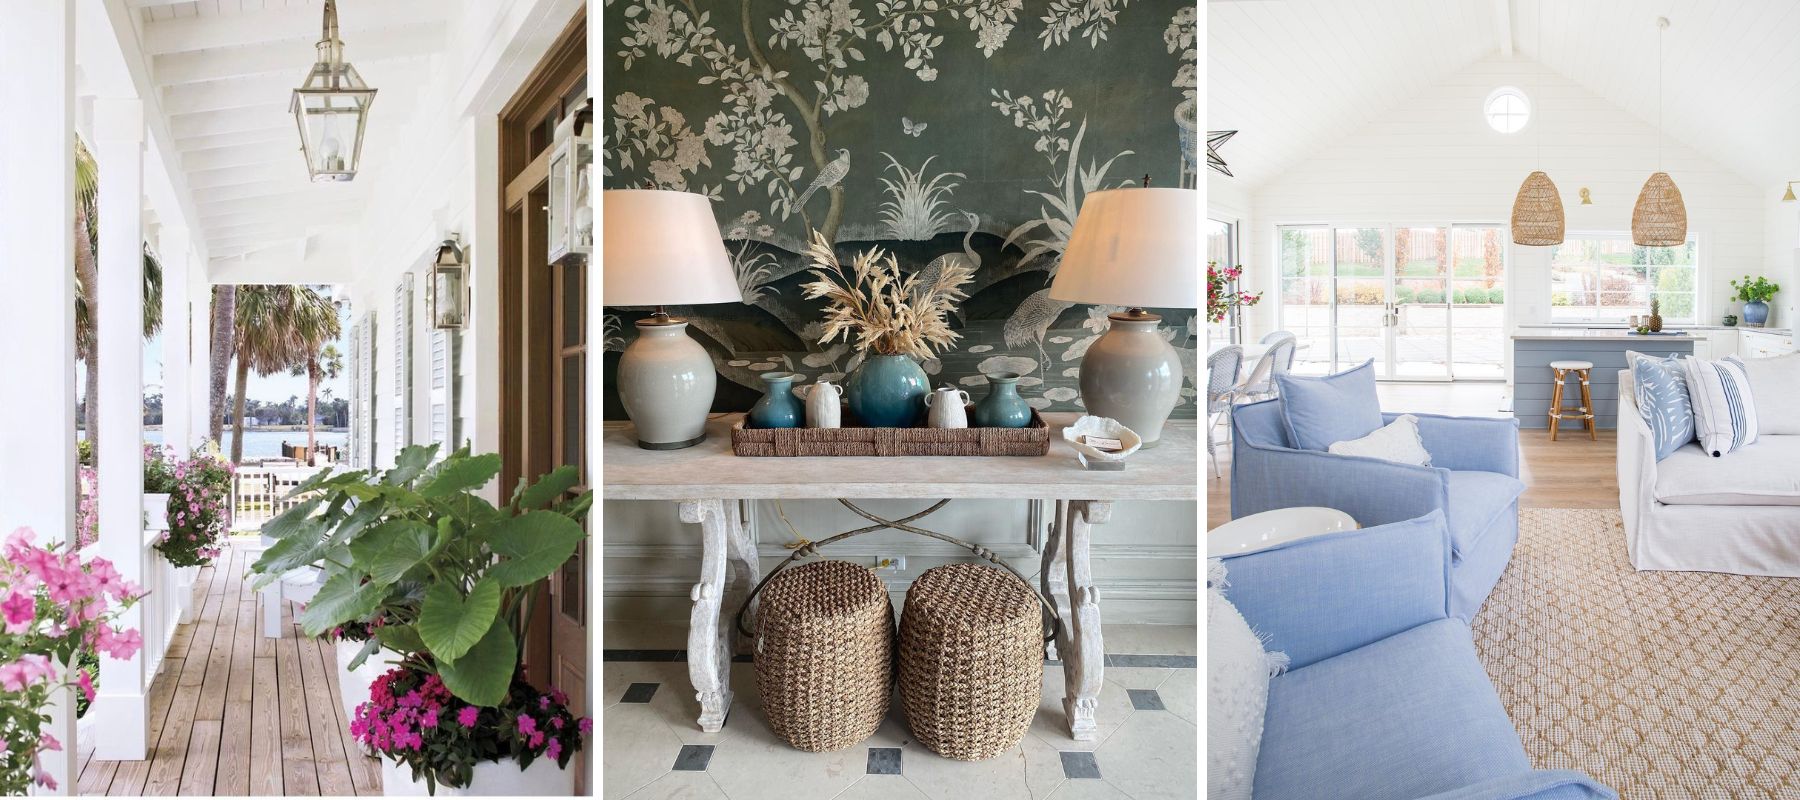 Making a Splash: Infusing the Home with Fresher Version of the Coastal Aesthetic